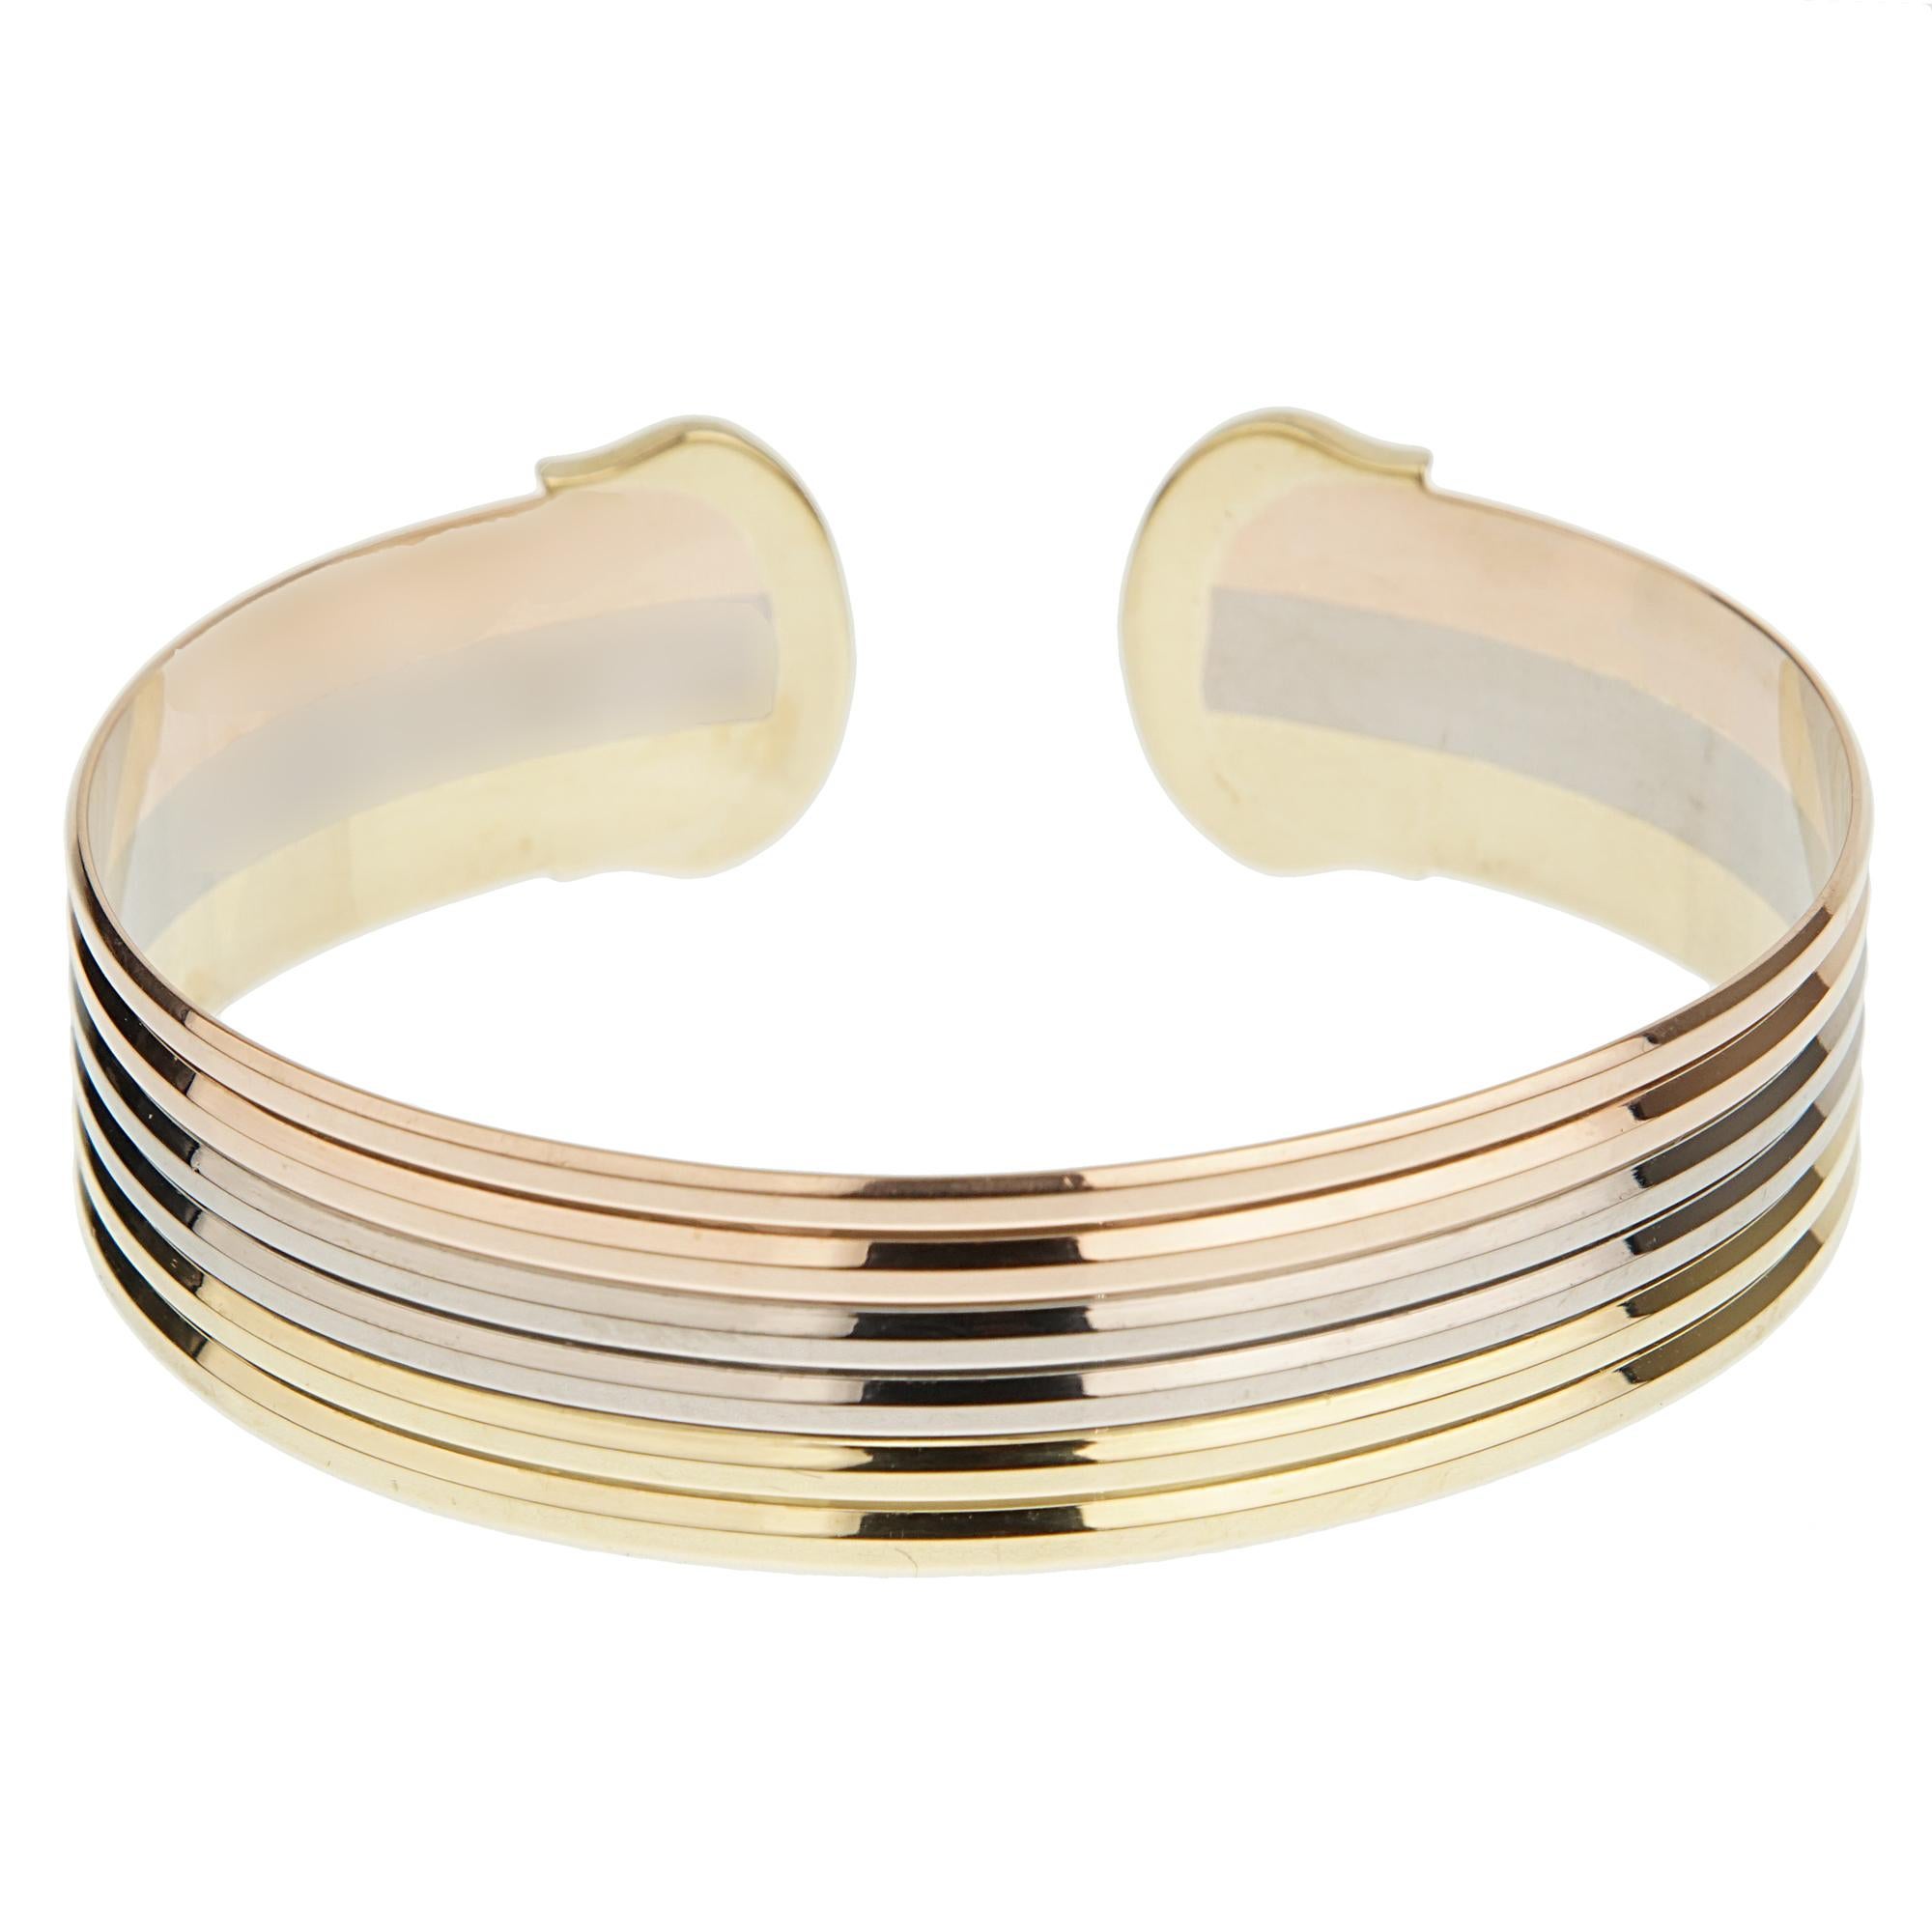 An iconic Cartier bracelet circa 1990s showcasing the C de Cartier motif ends with a trinity style cuff in 18k white yellow and rose gold. The bracelet will fit a 7